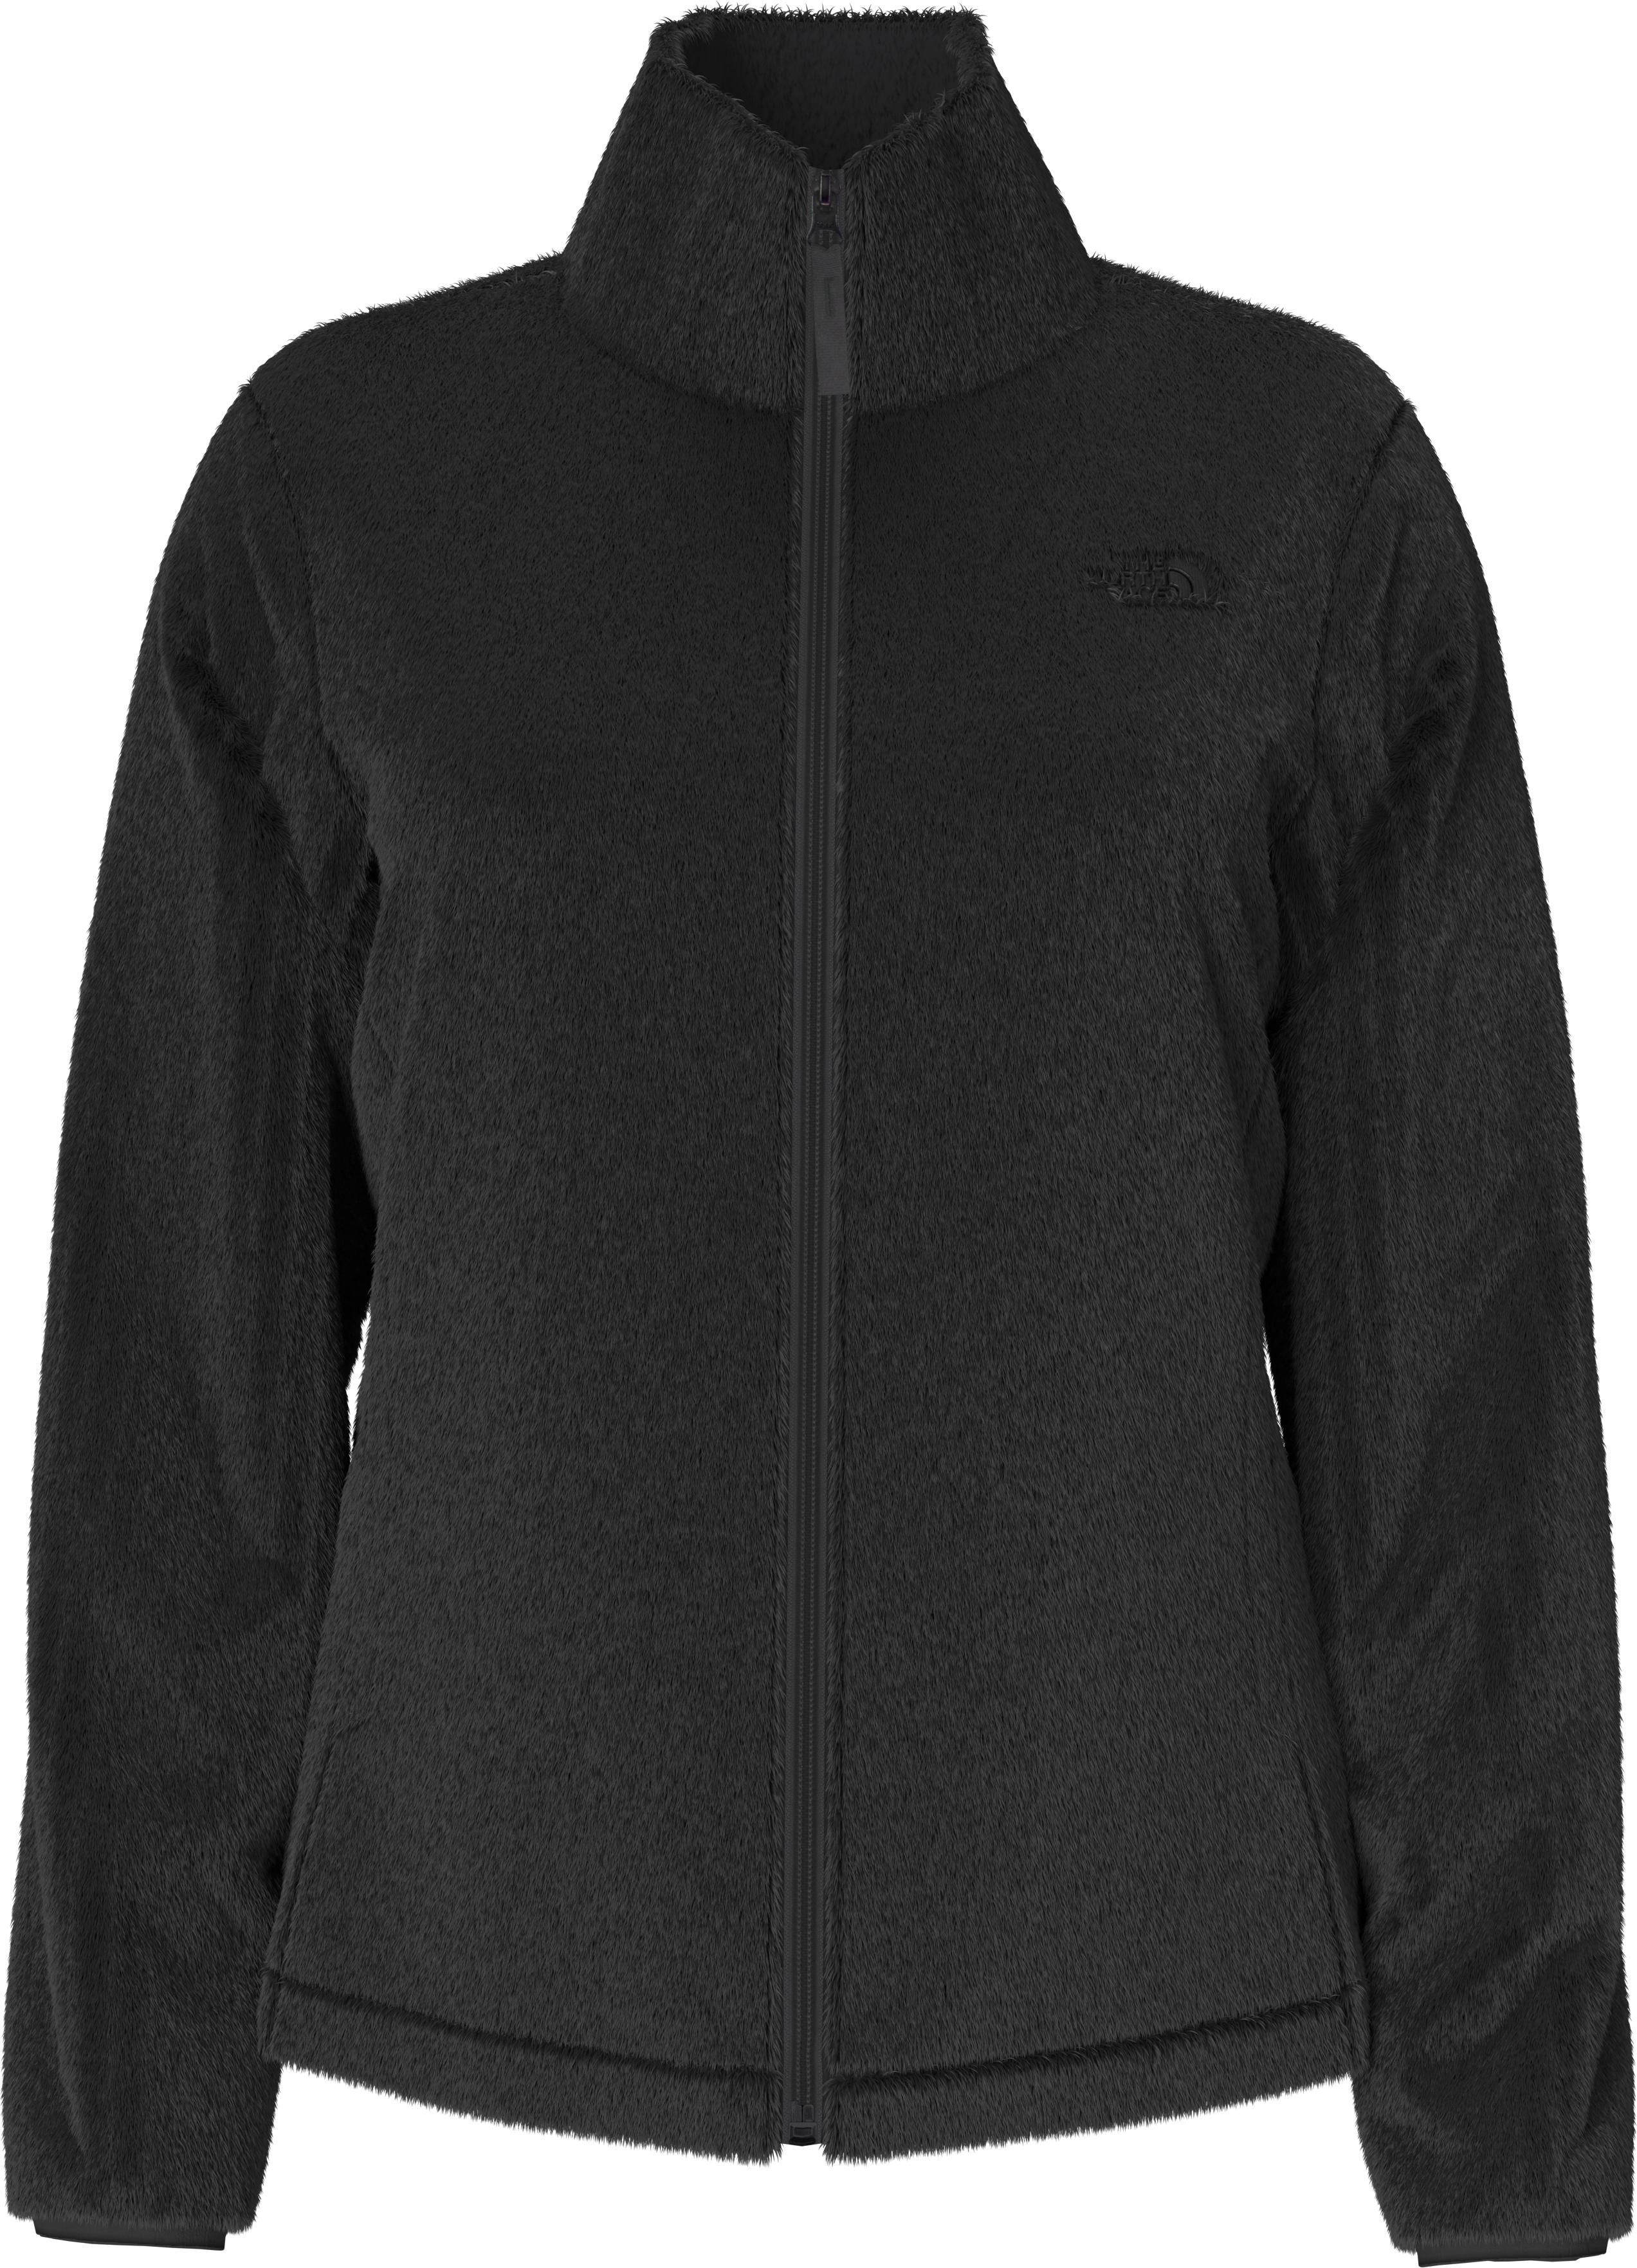 The North Face Women's Osito Jacket-Black